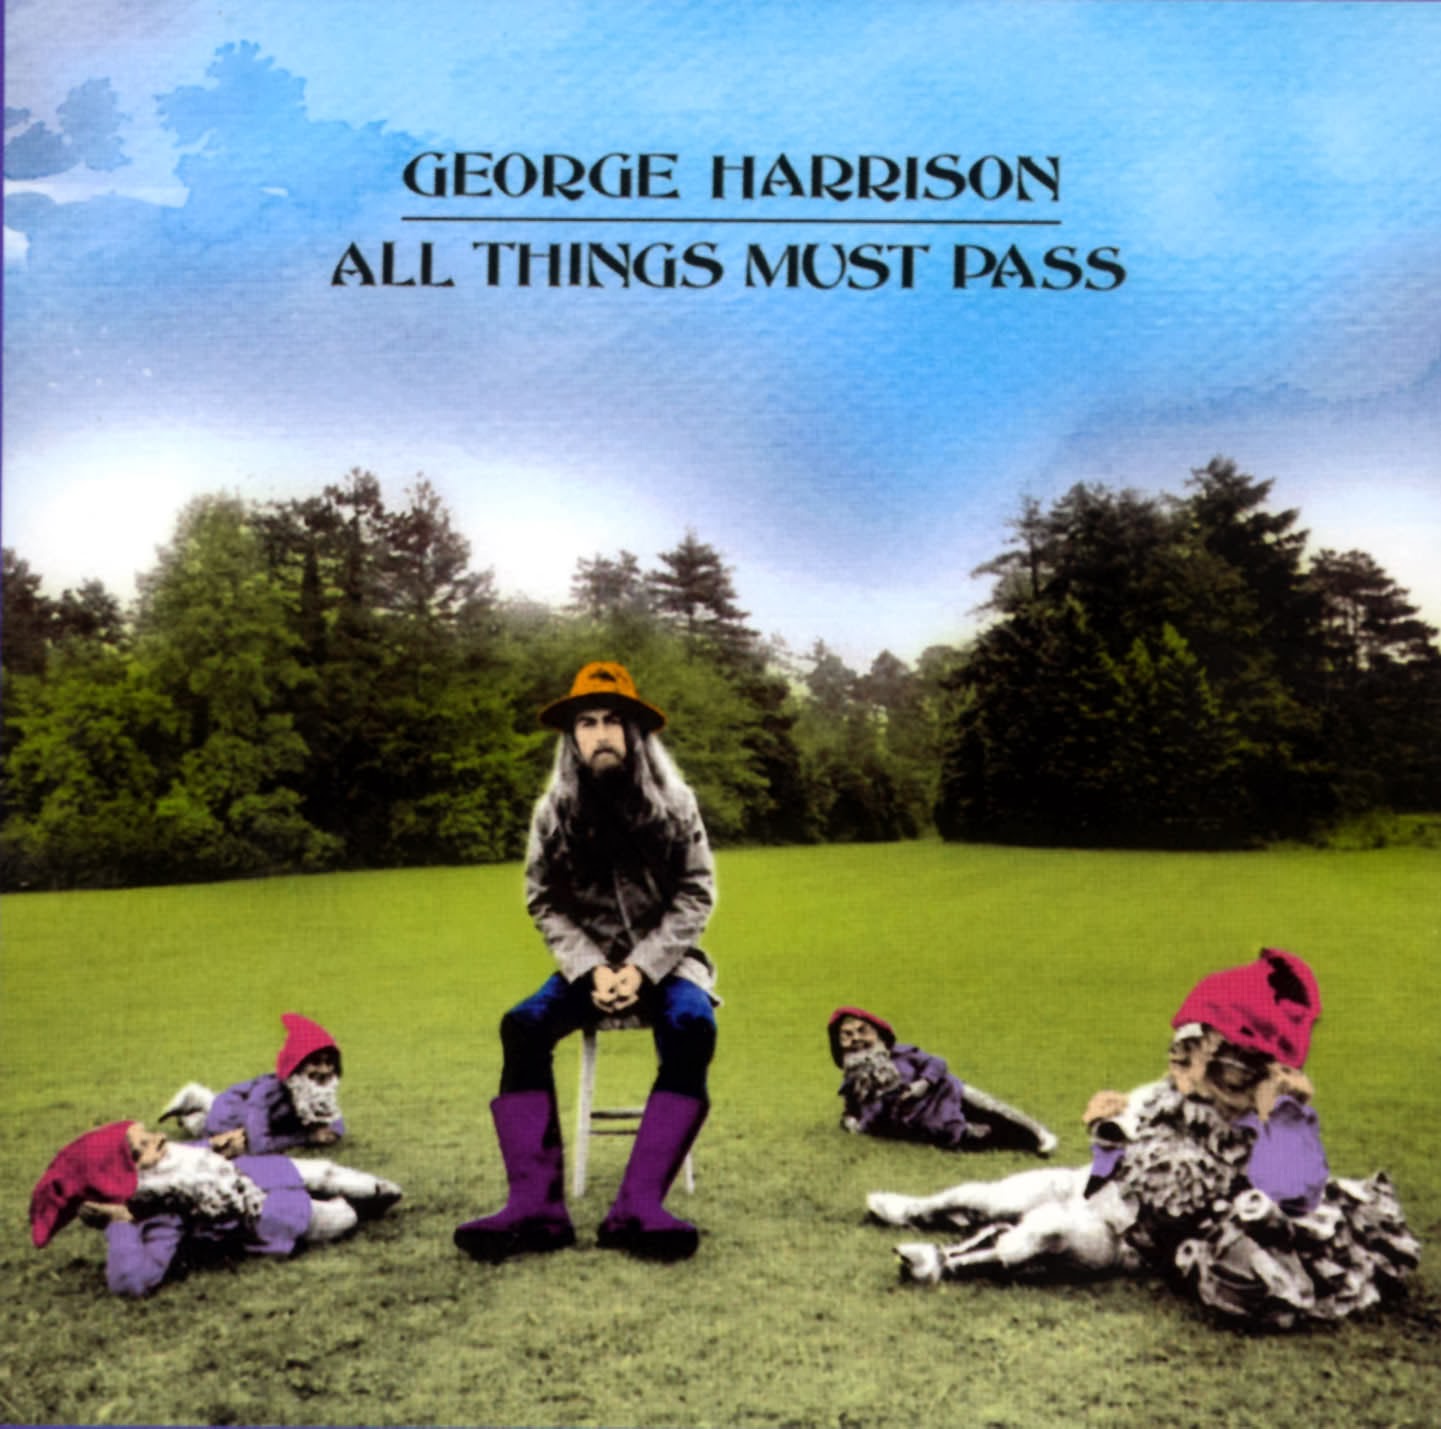 george harrison discography torrent